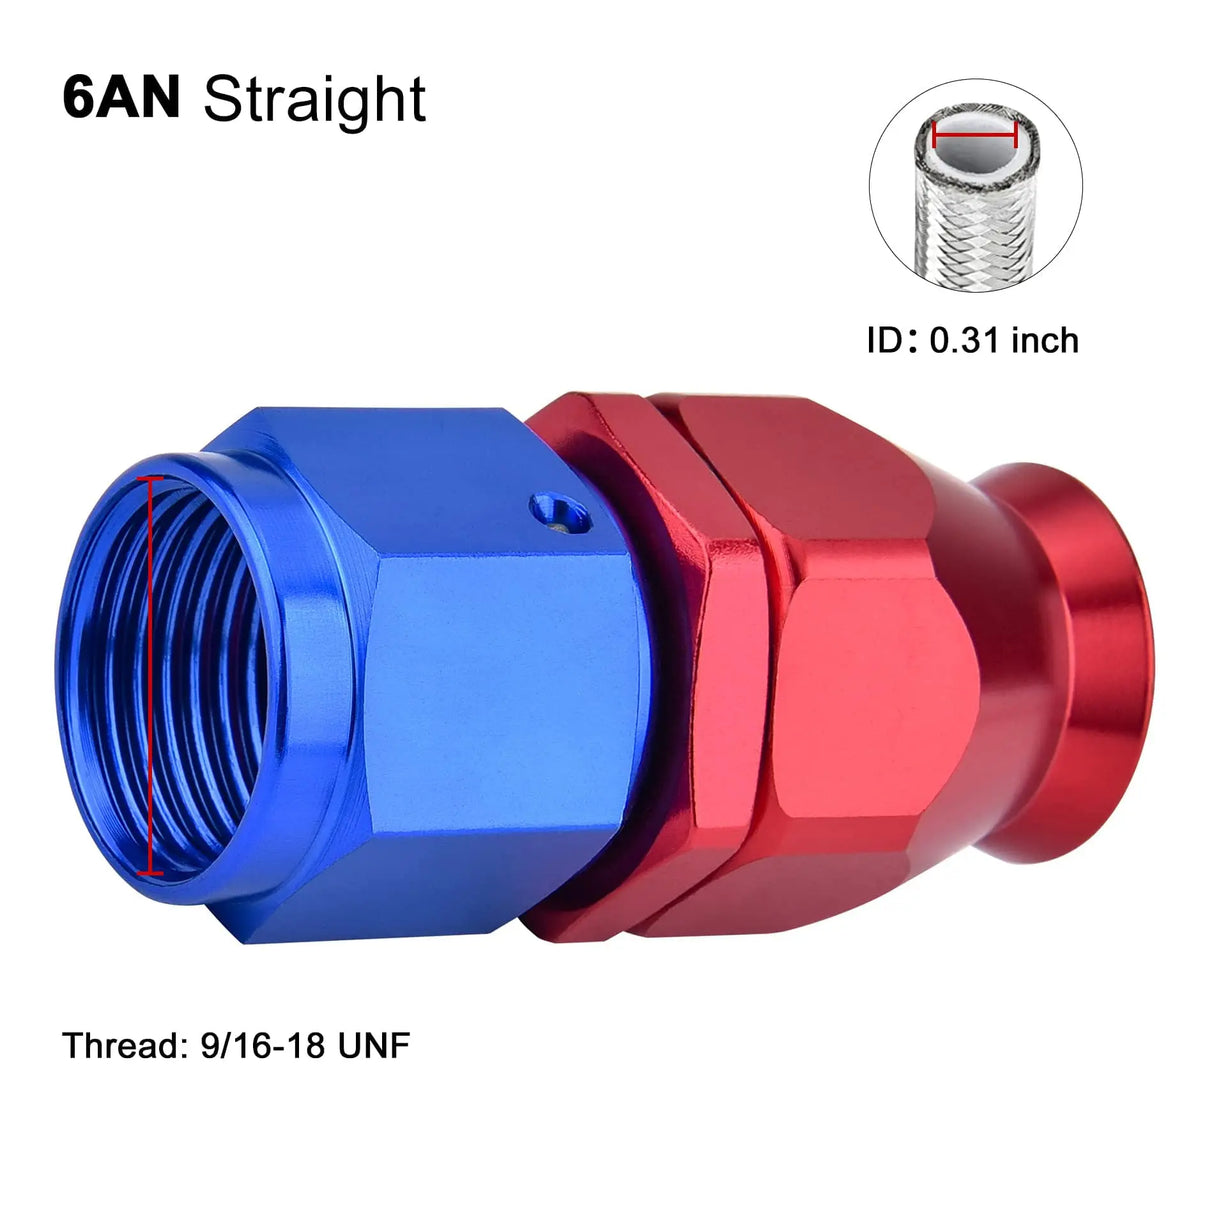 EVIL ENERGY Straight PTFE Hose End Only for PTFE E85 Fuel Line Fitting  Adapter Blue&Red (6/8/10AN)